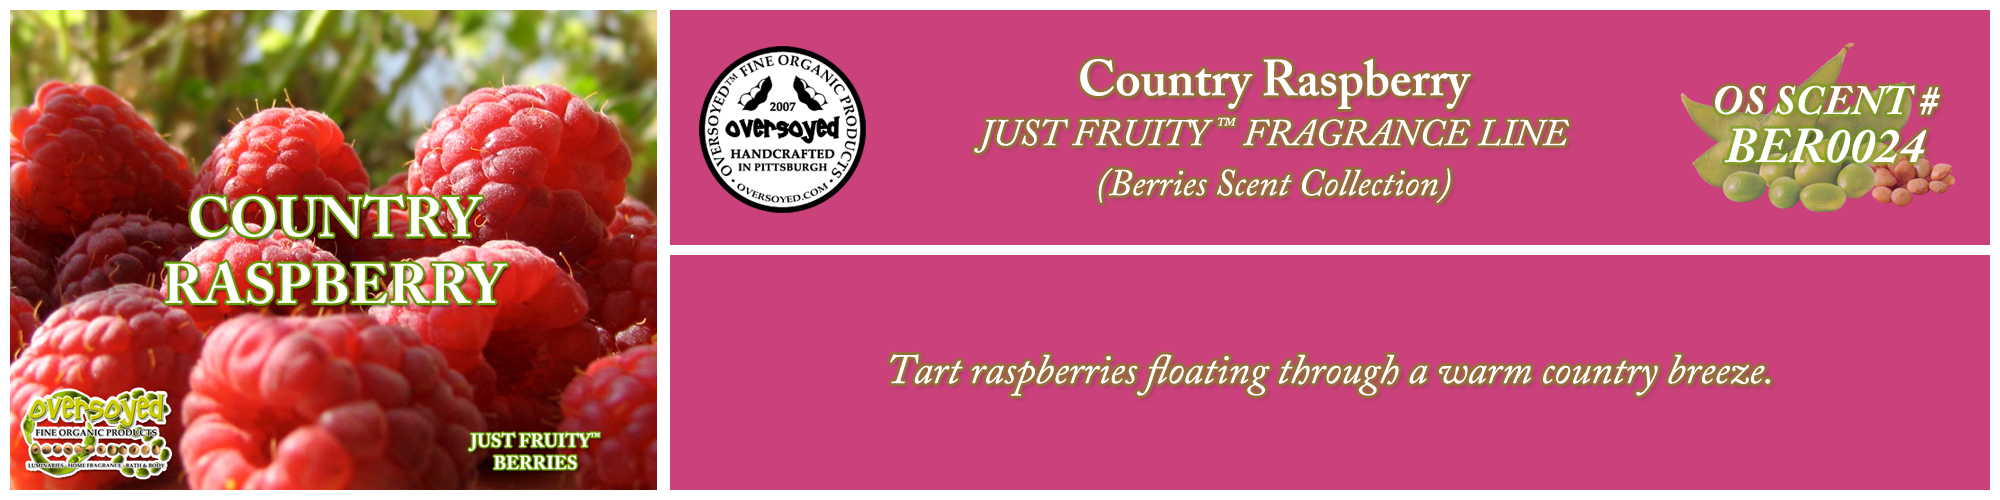 Country Raspberry Handcrafted Products Collection